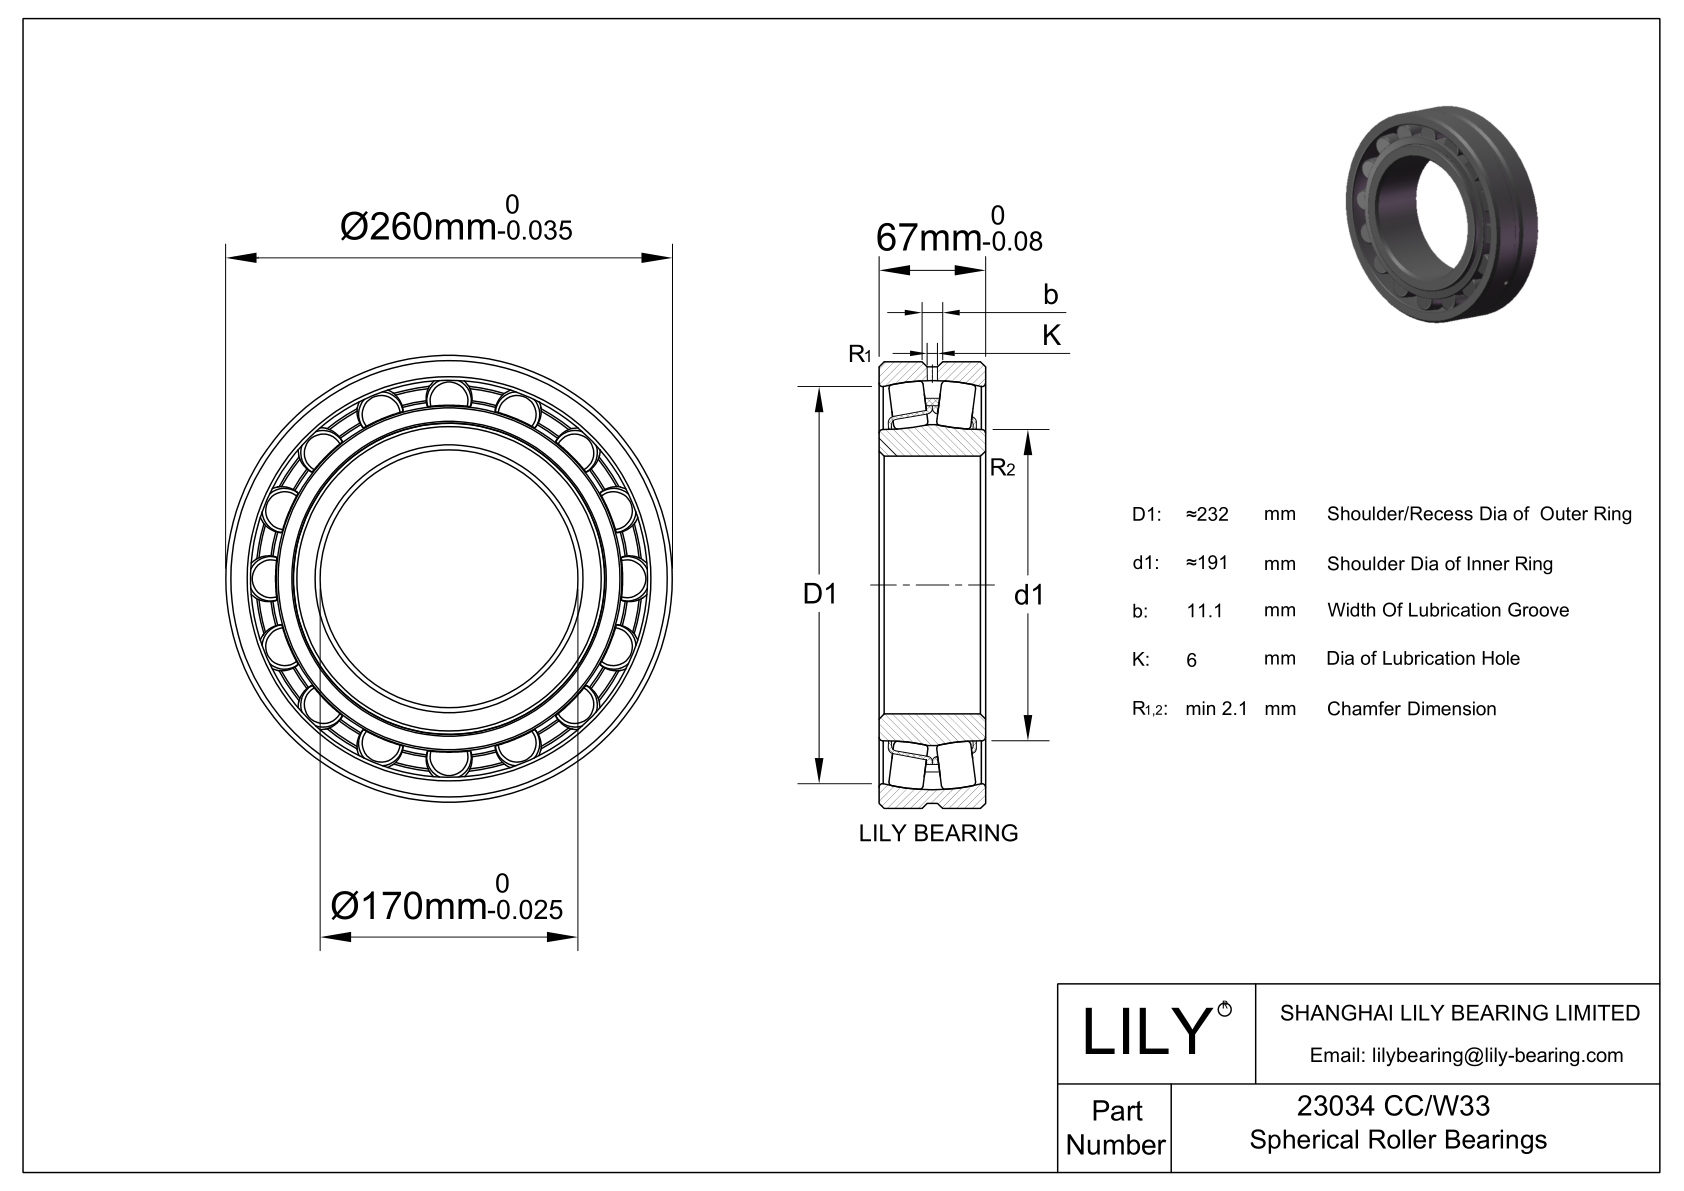 23034 CC/W33 Double Row Spherical Roller Bearing cad drawing